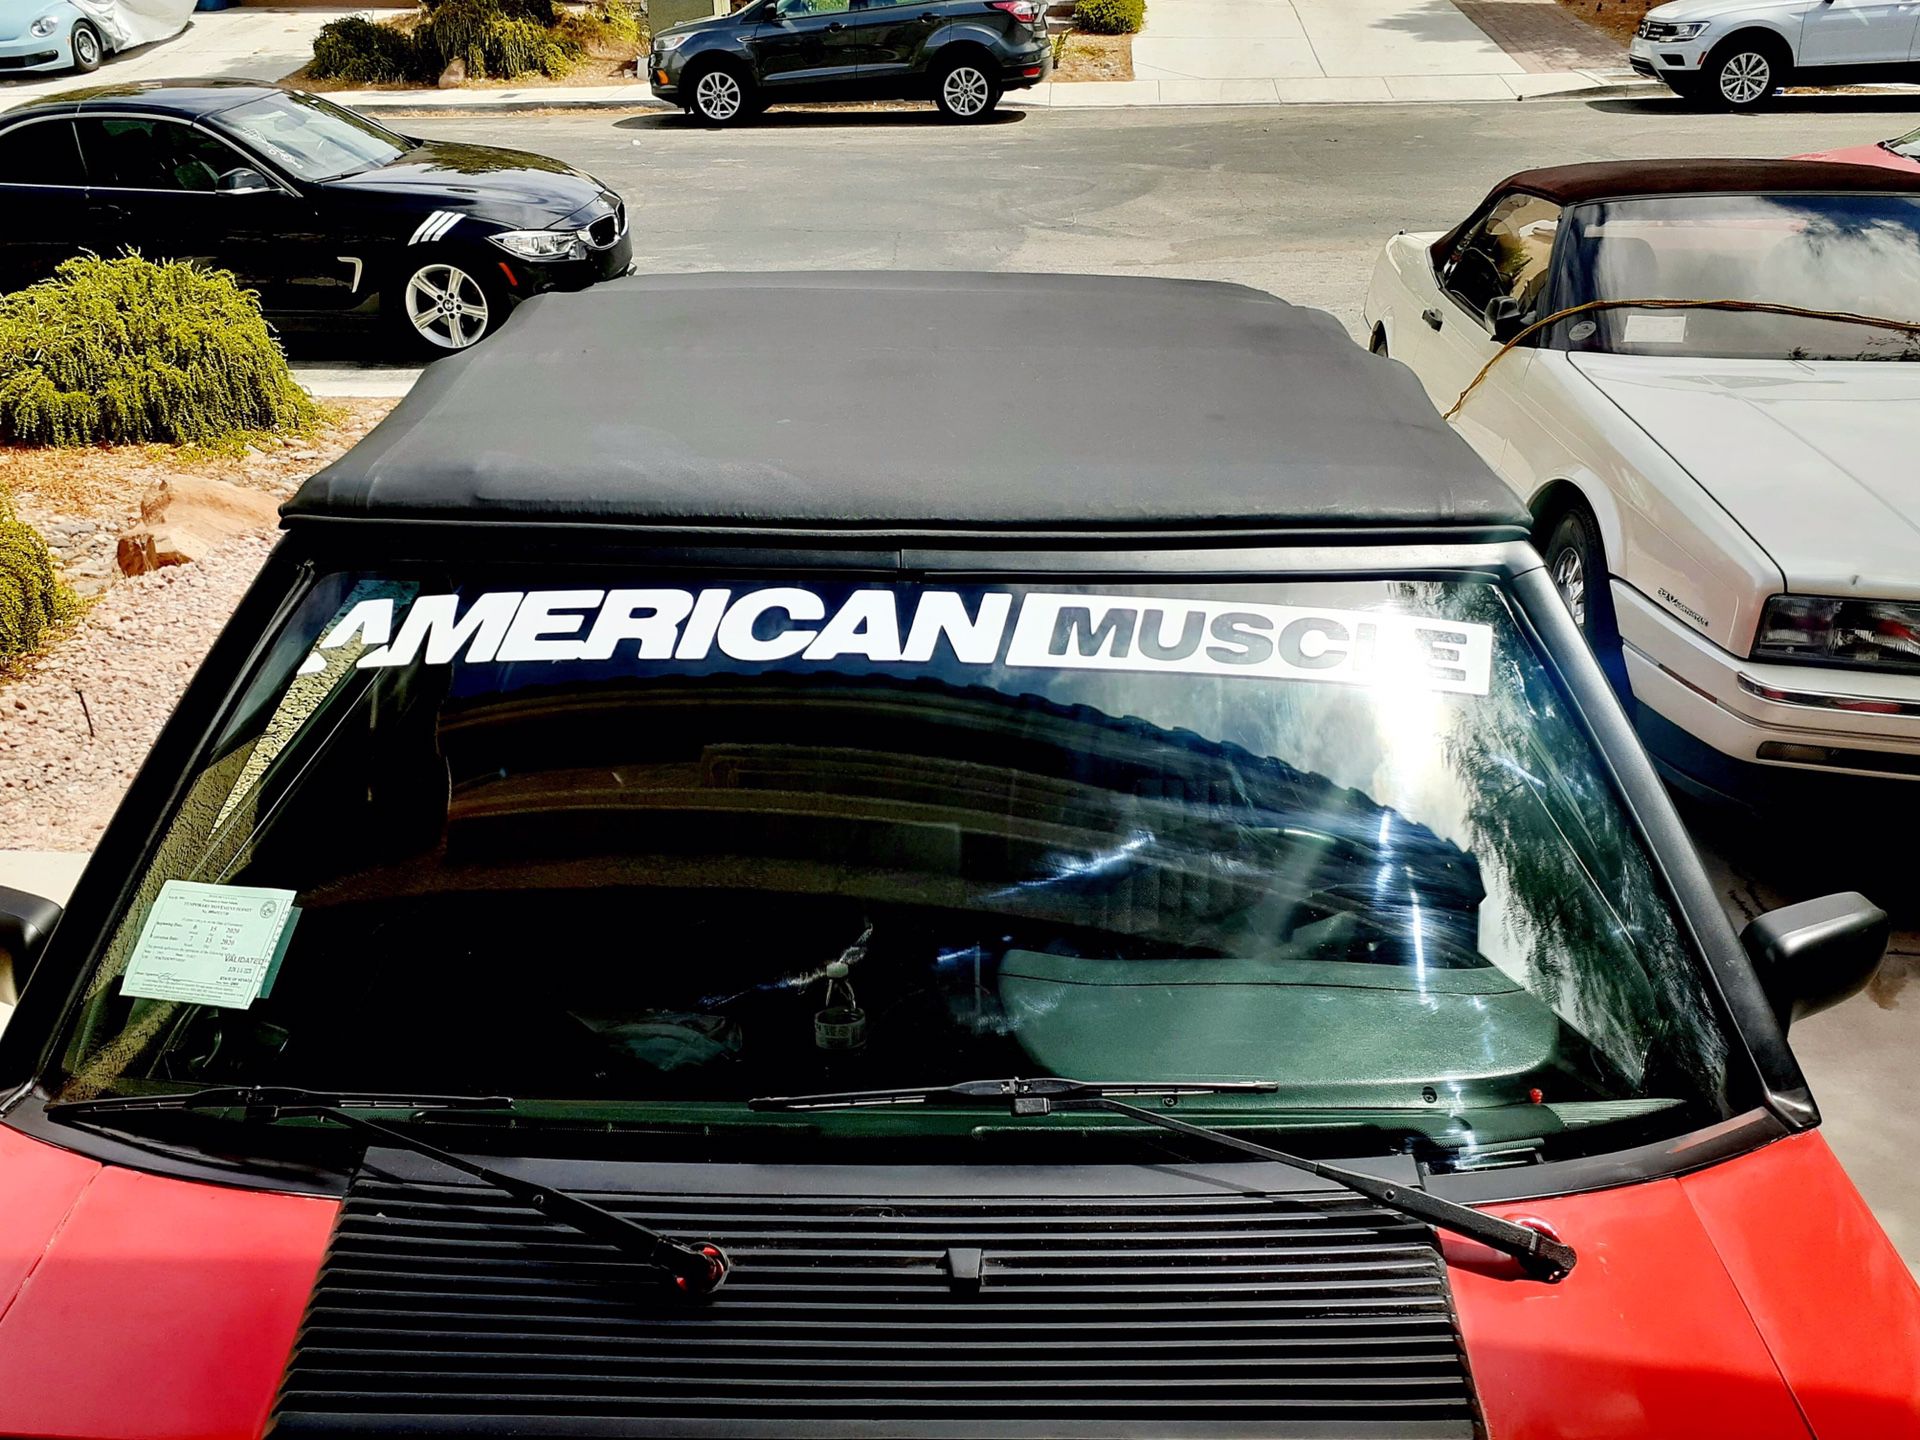 American Muscle Decal Windshield Banner Sun Visor Strip for Mustang, Challenger, Charger